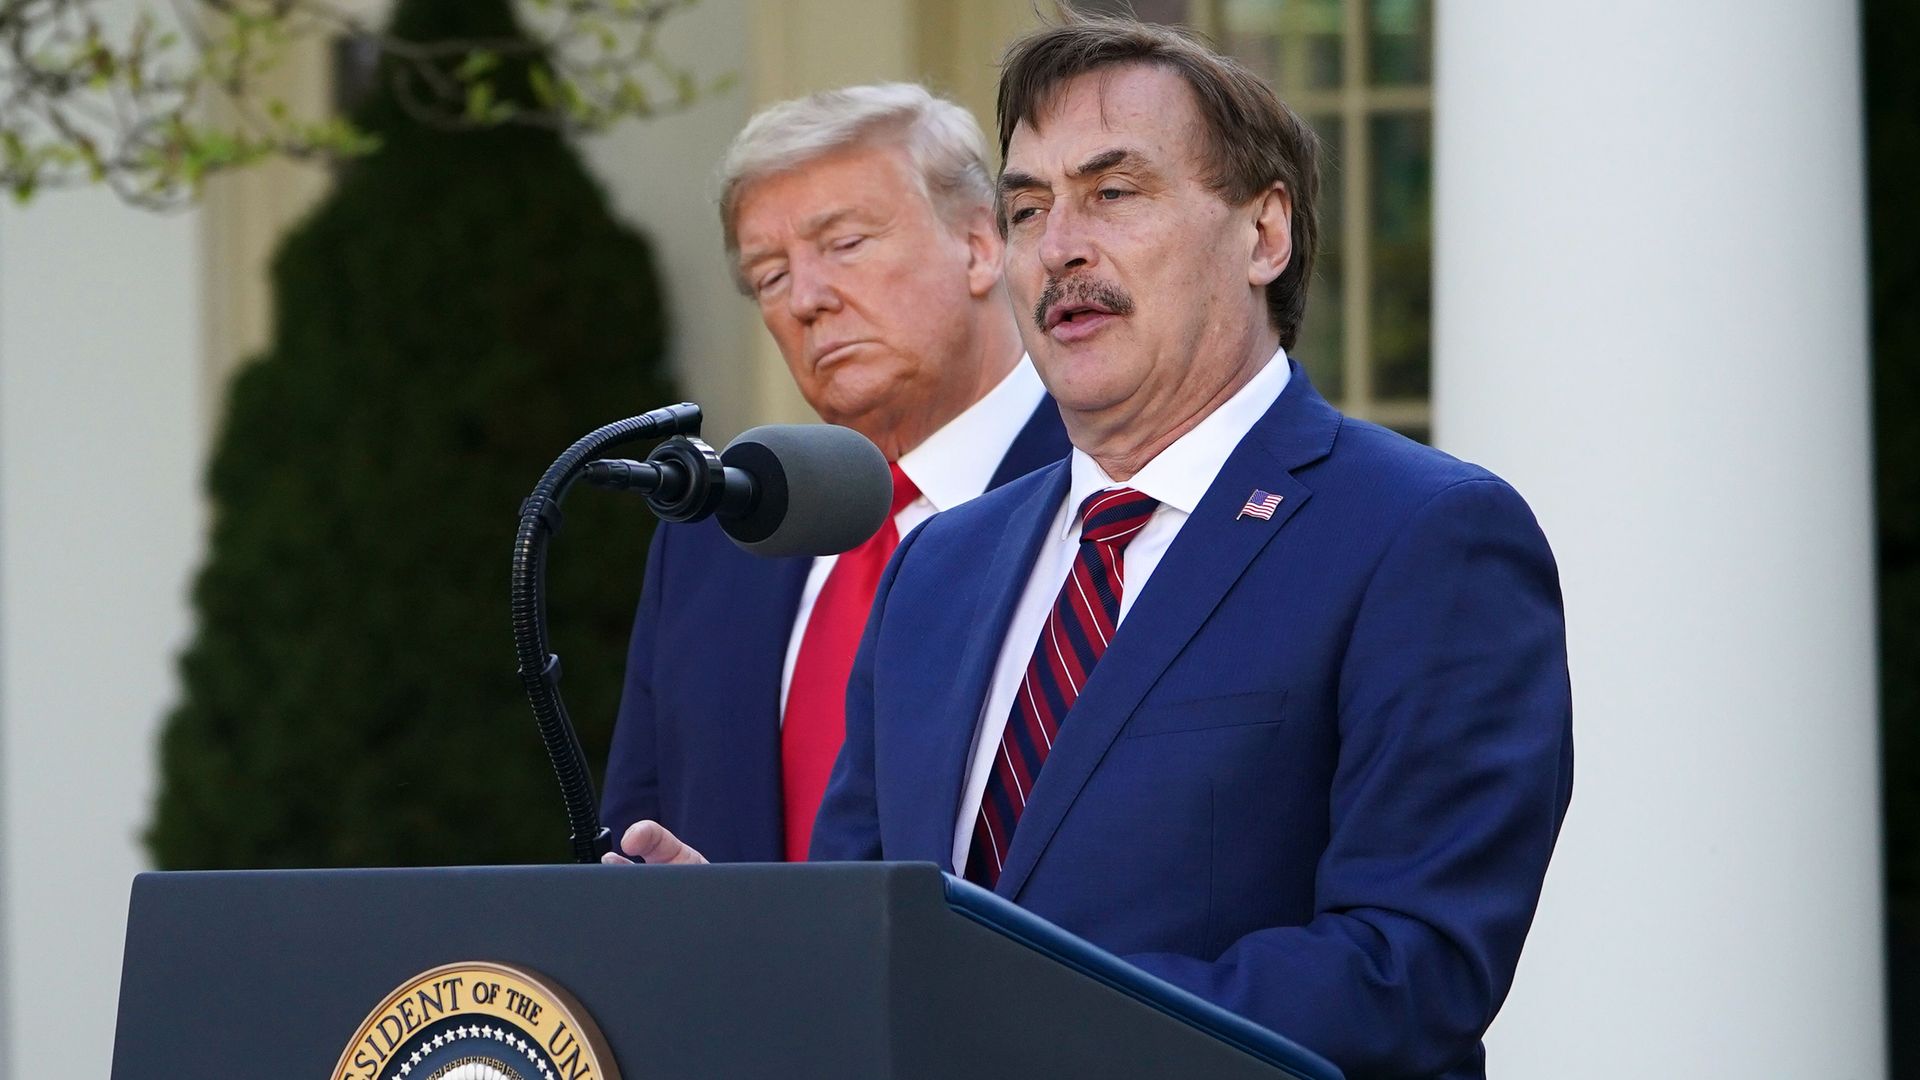 President Donald Trump listens as Michael J. Lindell, CEO of MyPillow Inc., speaks during the daily briefing on COVID-19, at the White House in Washington, DC, on March 30